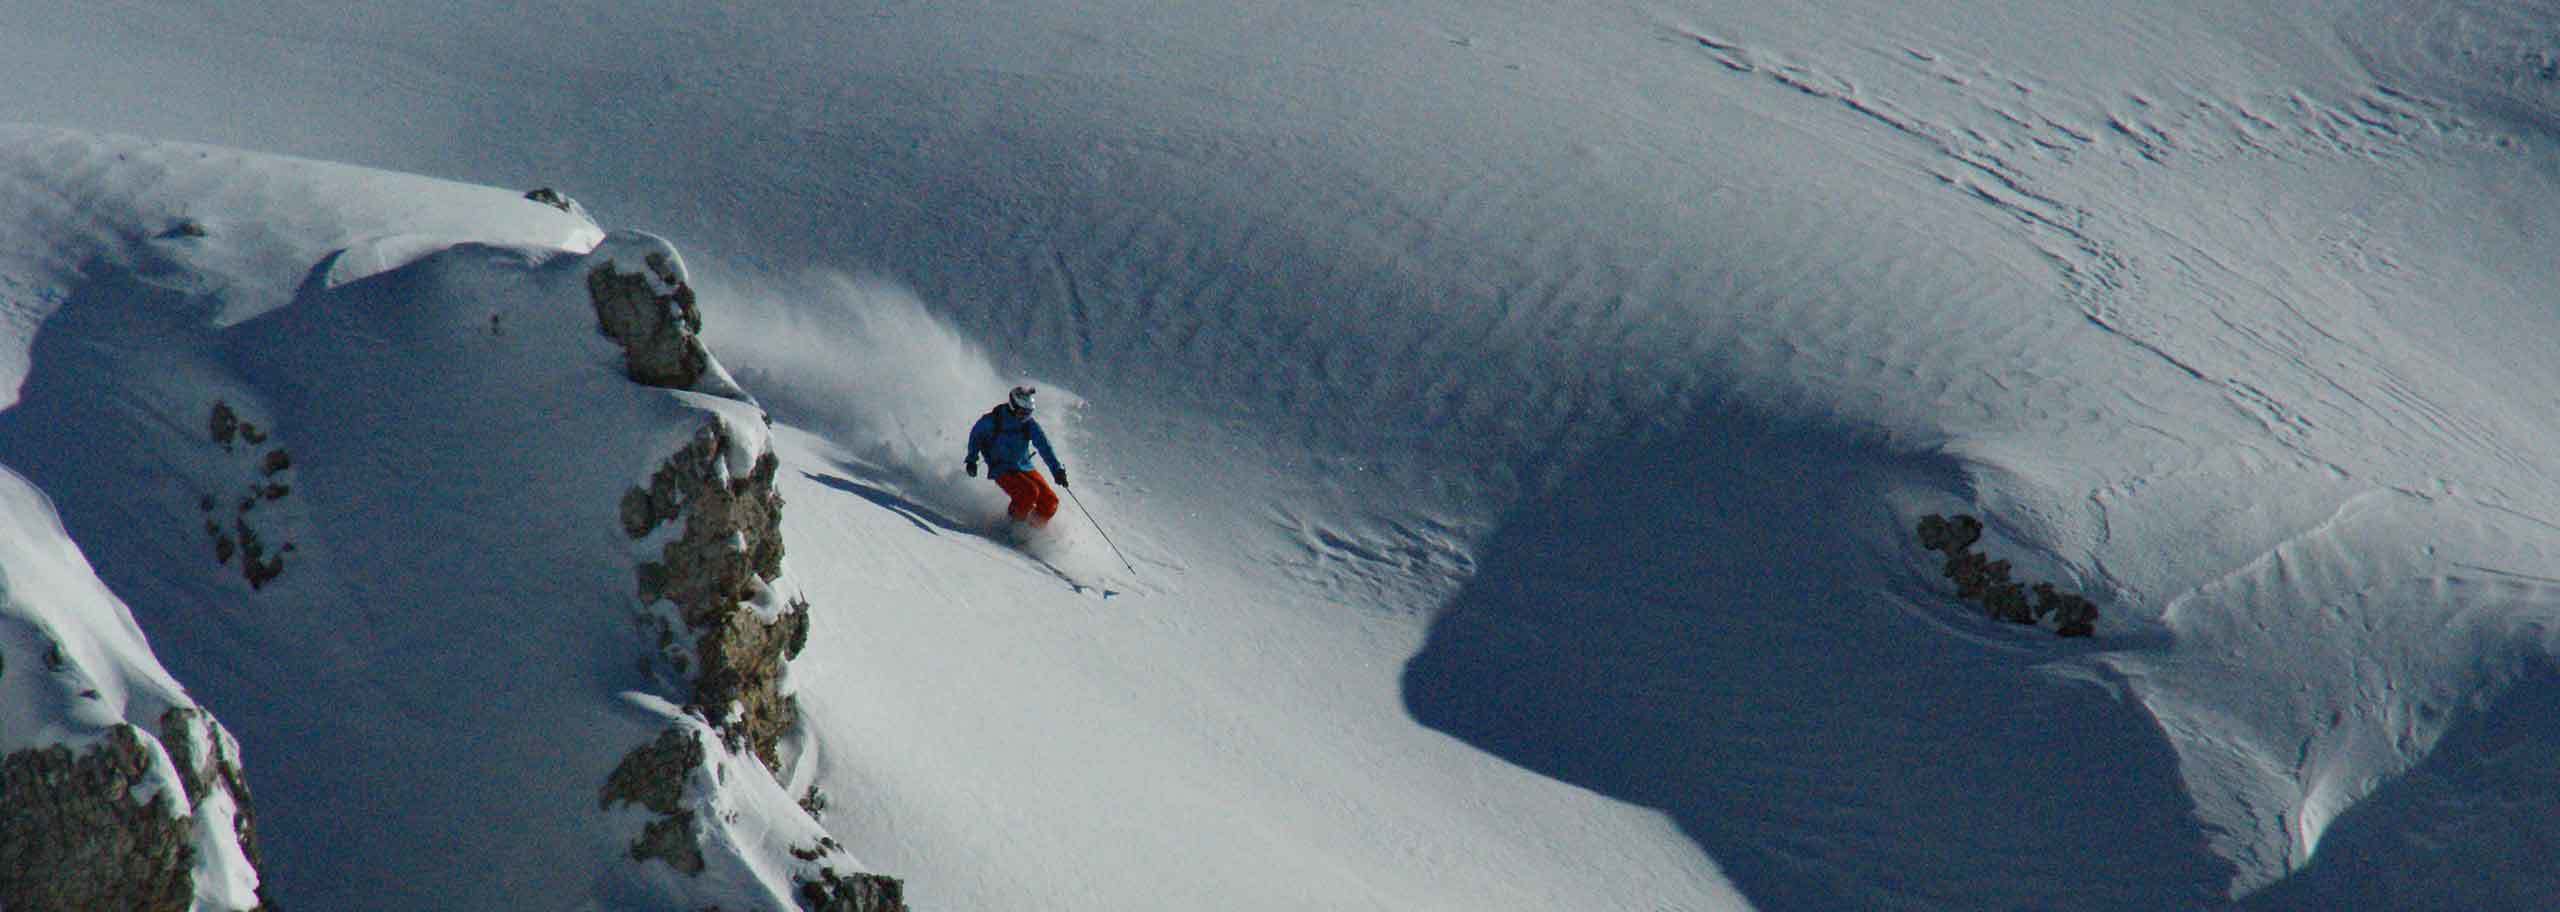 Off-piste Skiing in Folgarida Marilleva, Freeride with a Mountain Guide